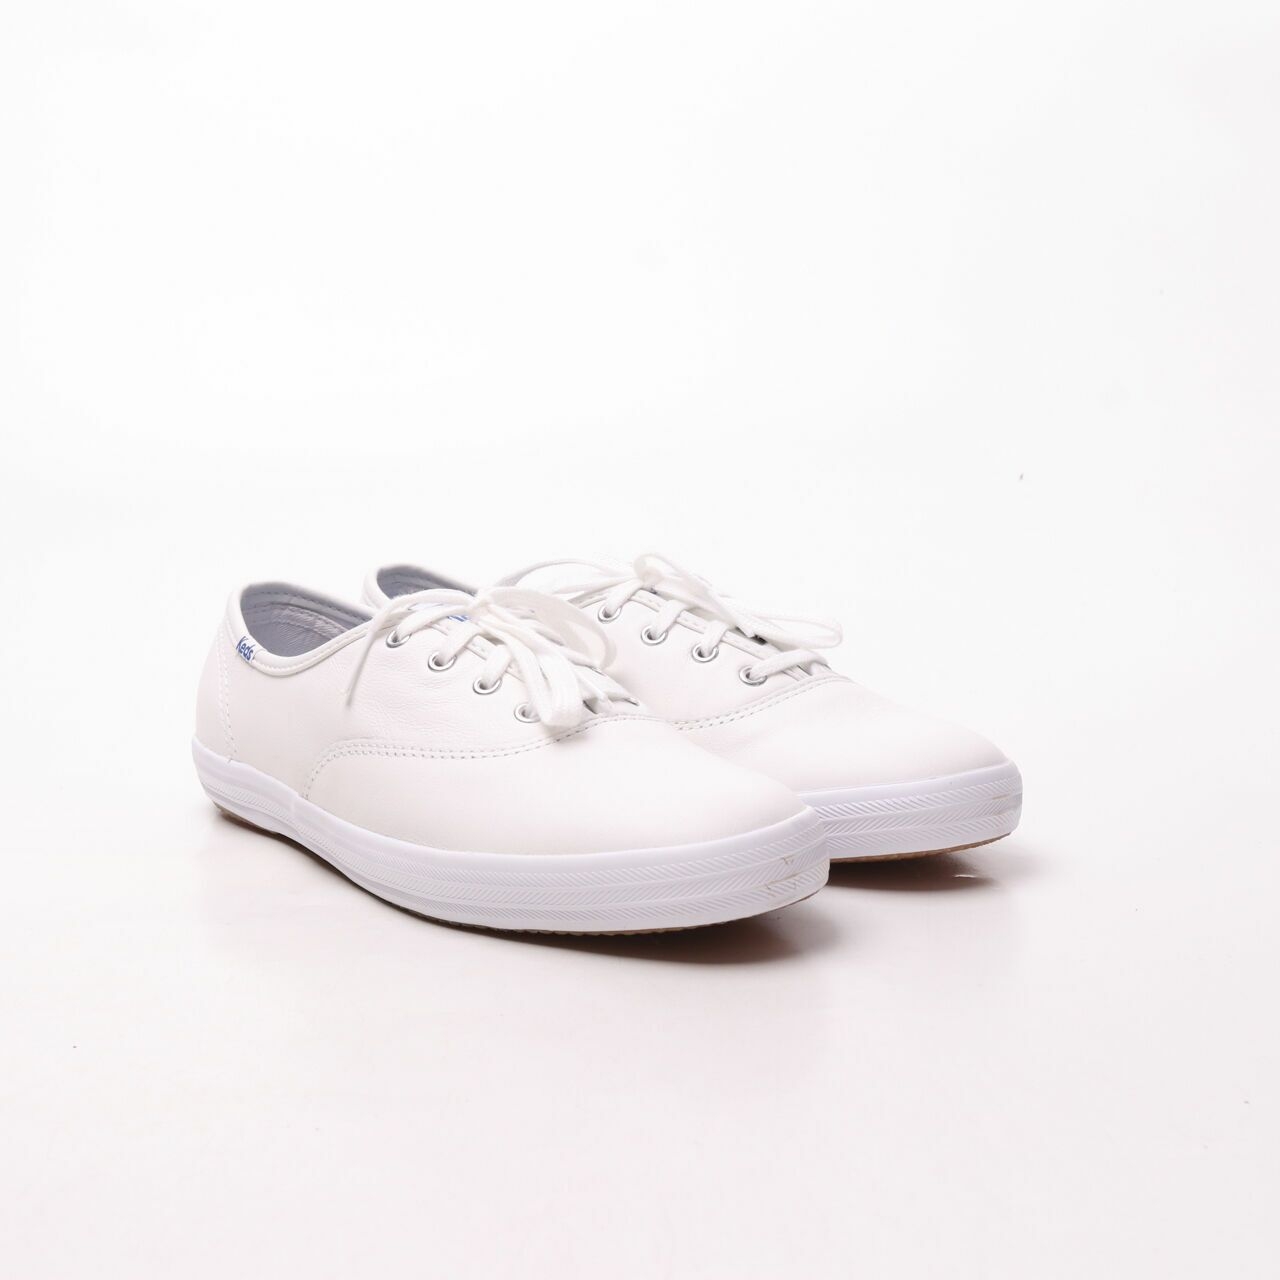 Keds Champions White Leather Sneakers